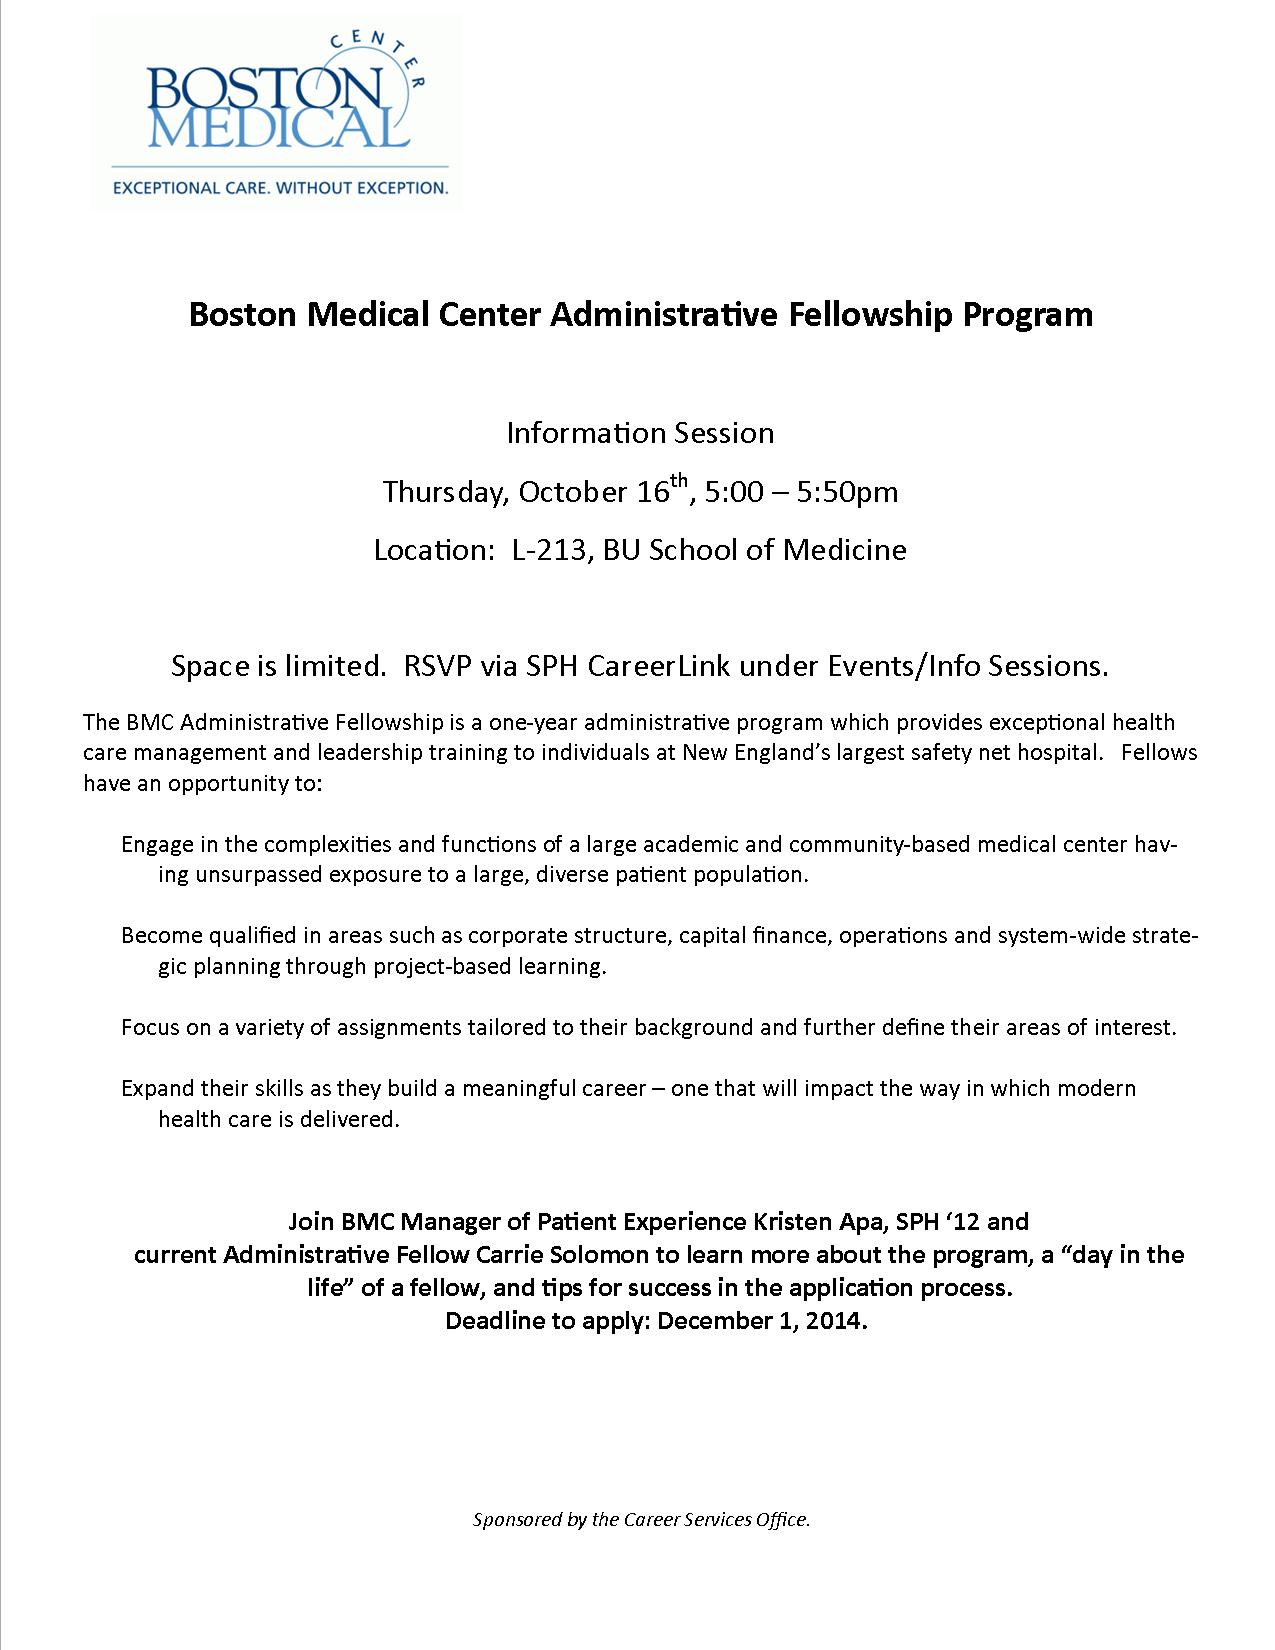 Boston Medical Center Seeks Sph Students For Administrative